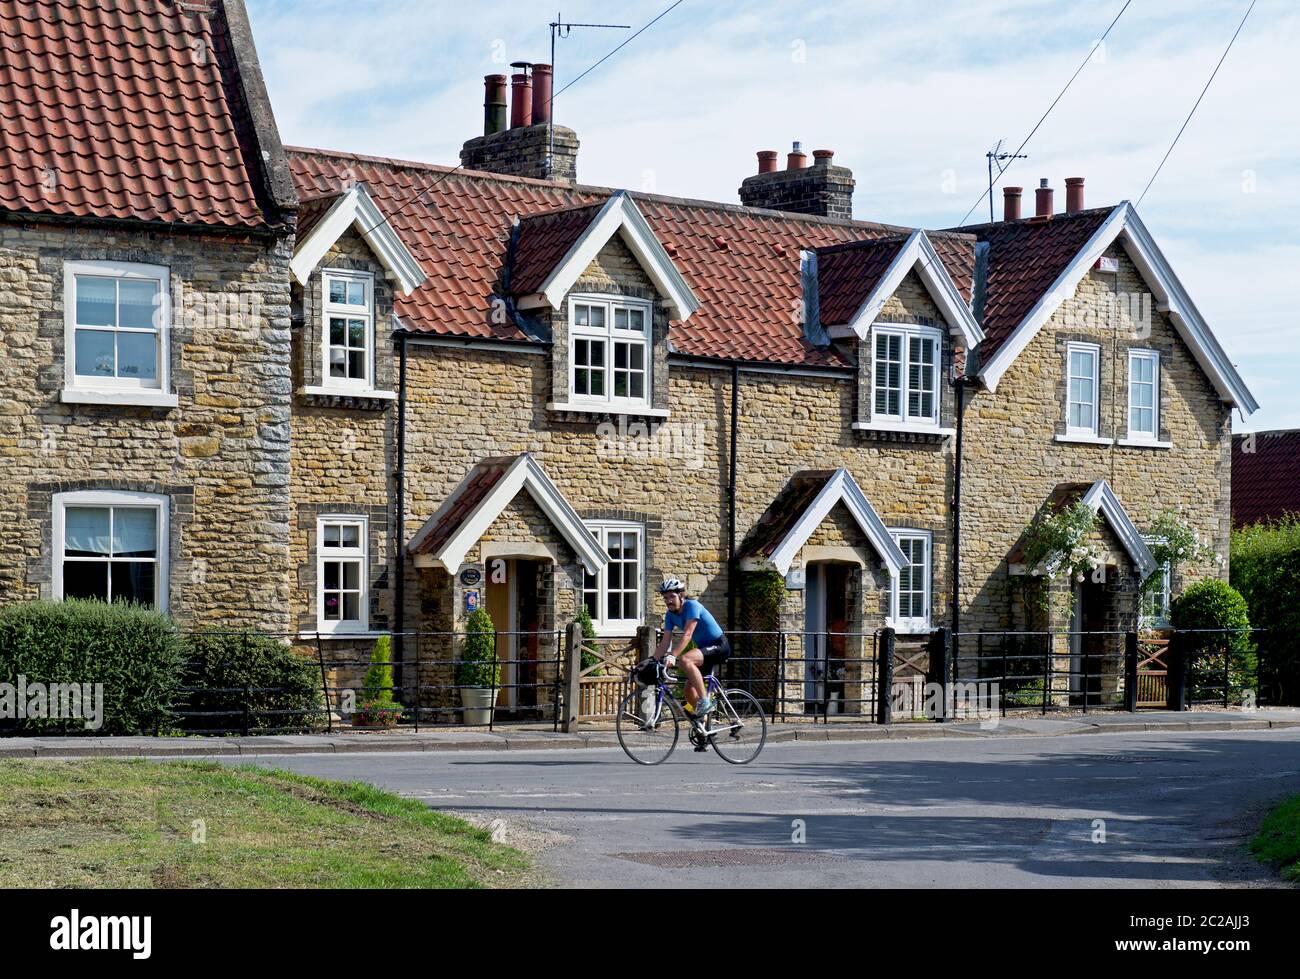 Cyclist in the village of Brantingham, East Yorkshire, England UK Stock Photo